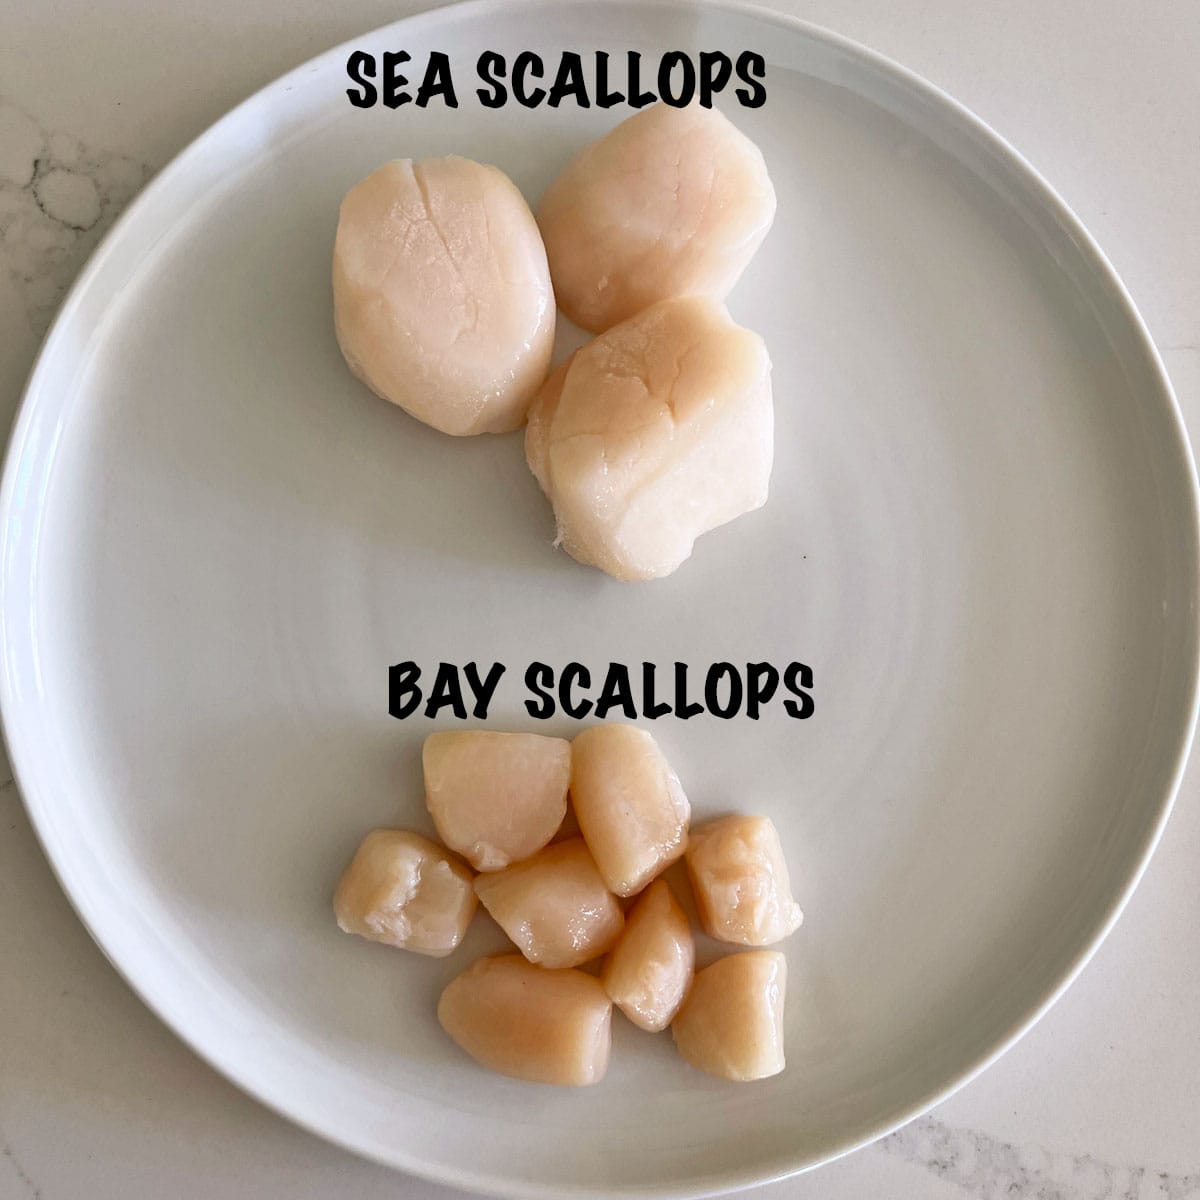 Sea scallops and bay scallops on a plate in a photo that shows the difference between them.